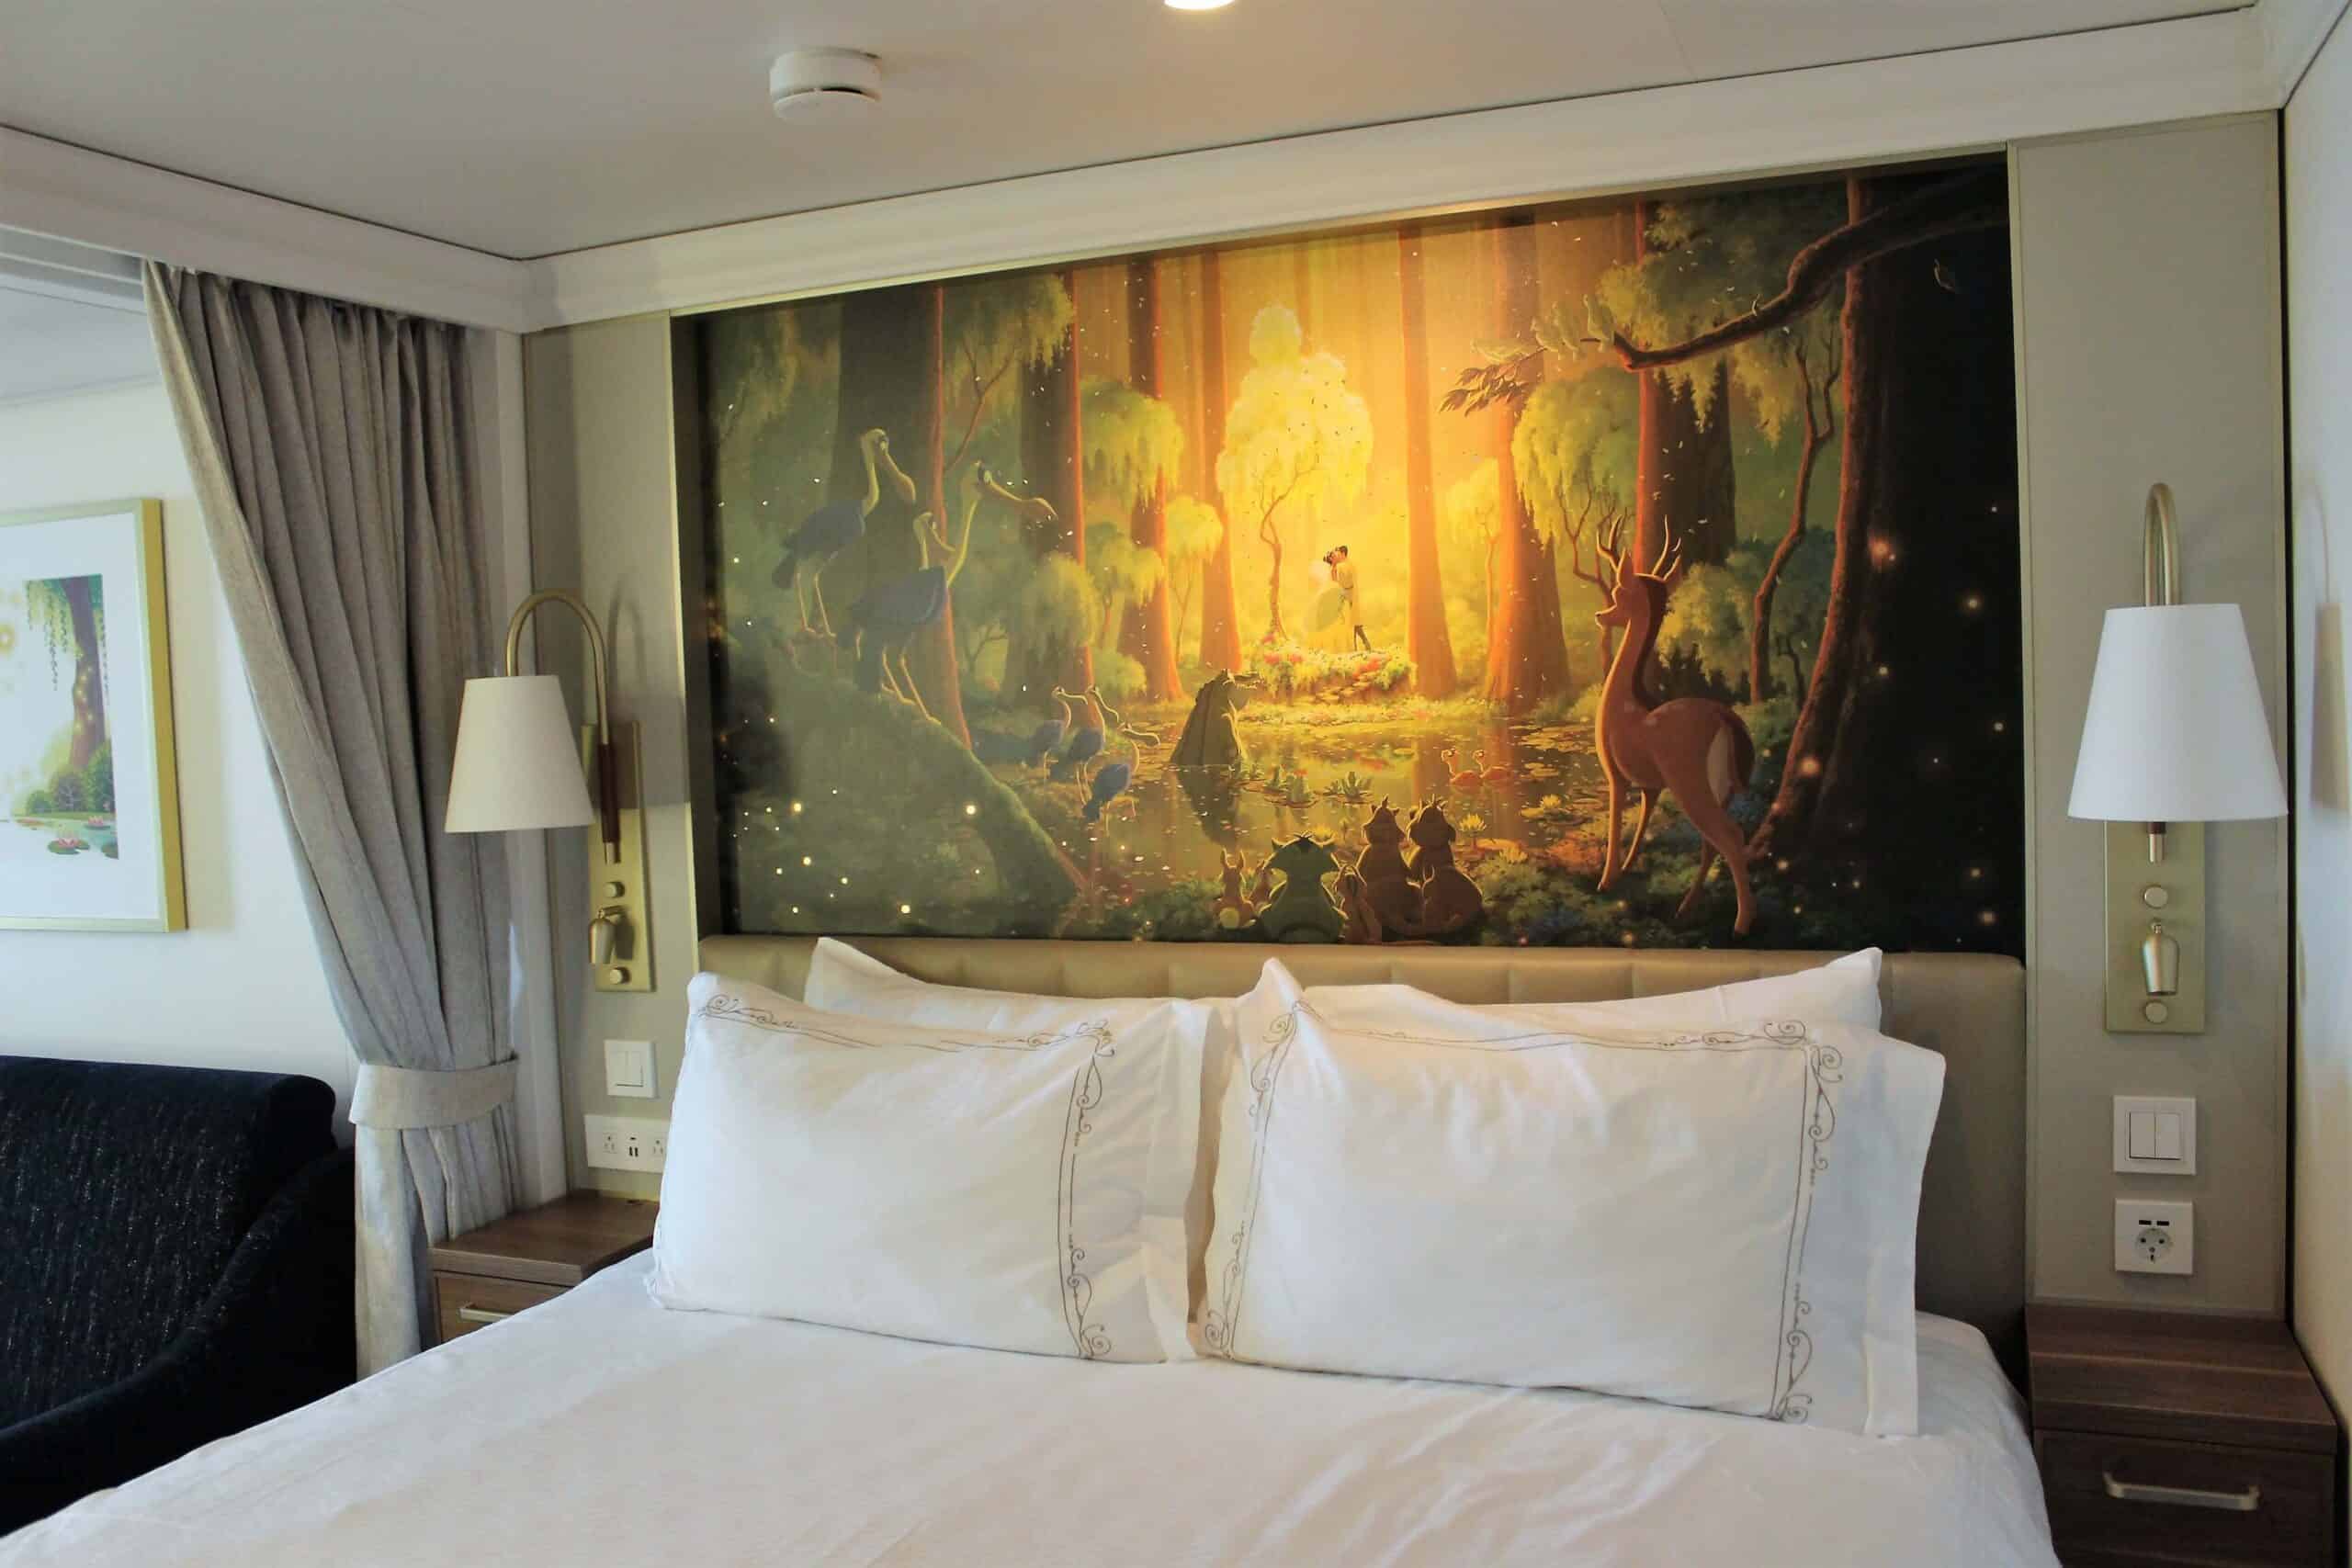 Tiana Themed Deluxe Family Stateroom with Verandah on Disney Wish with a scene from the movie Princess and the Frog as art behind the headboard of a bed with all white sheets